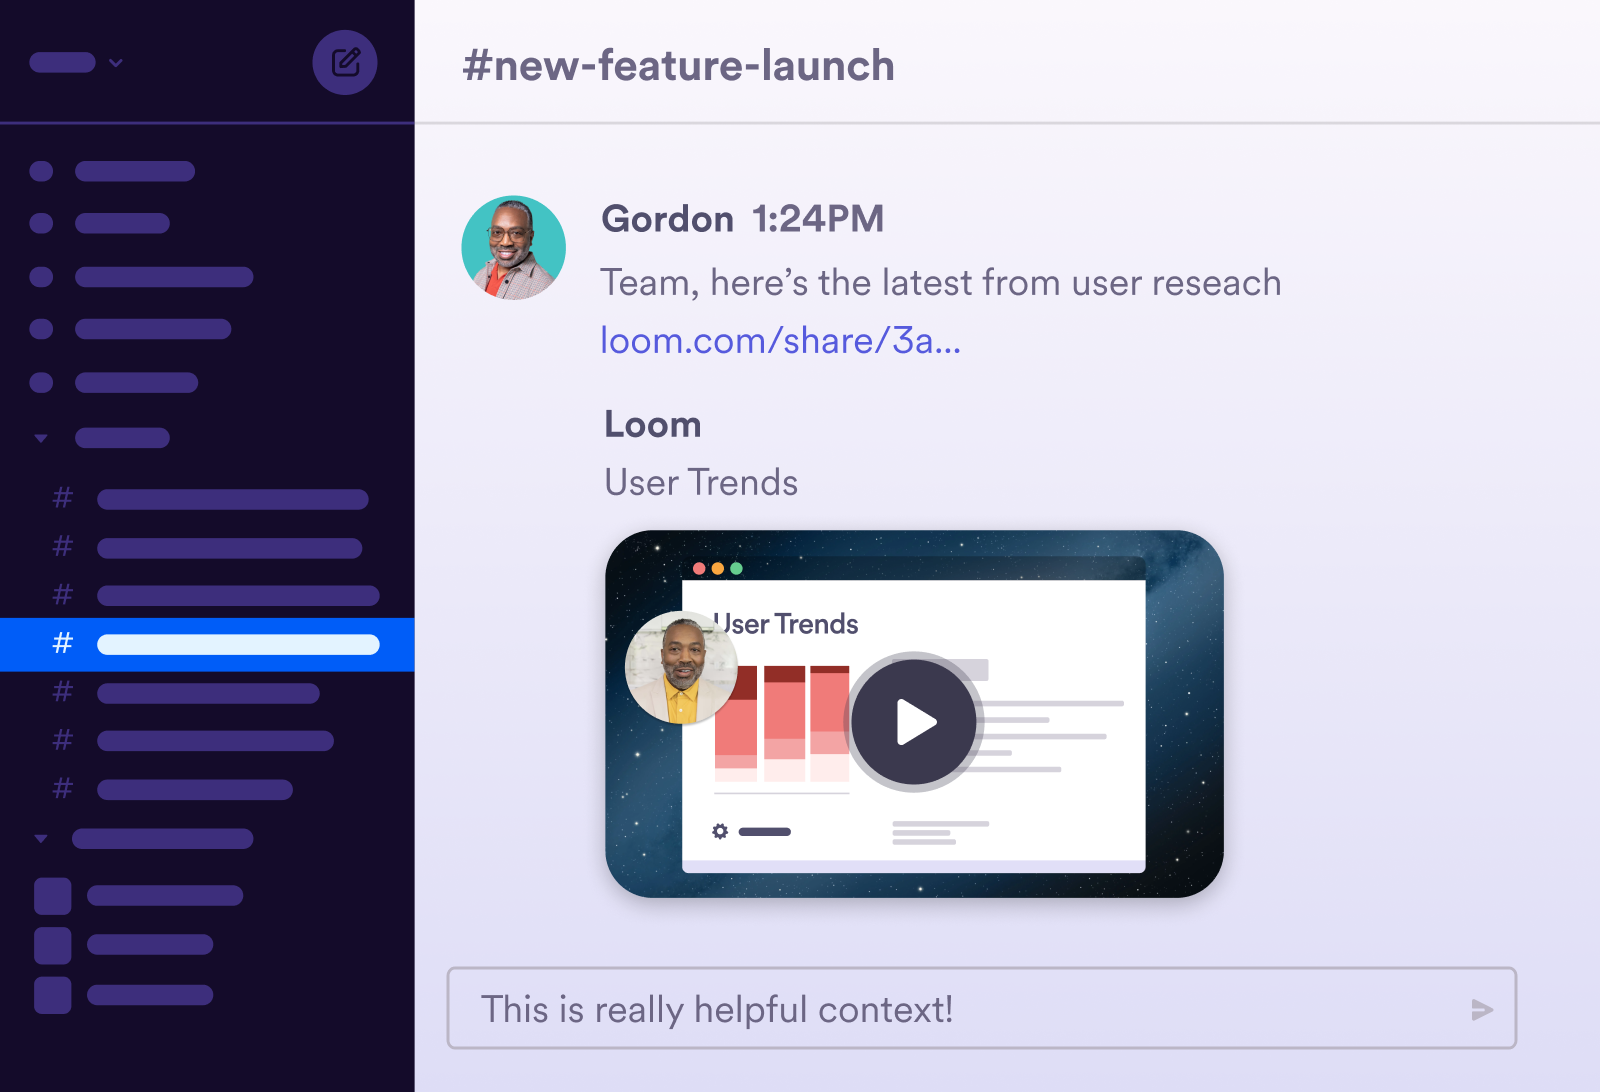 Person sharing user research via a loom in a Slack channel called "new feature launch"